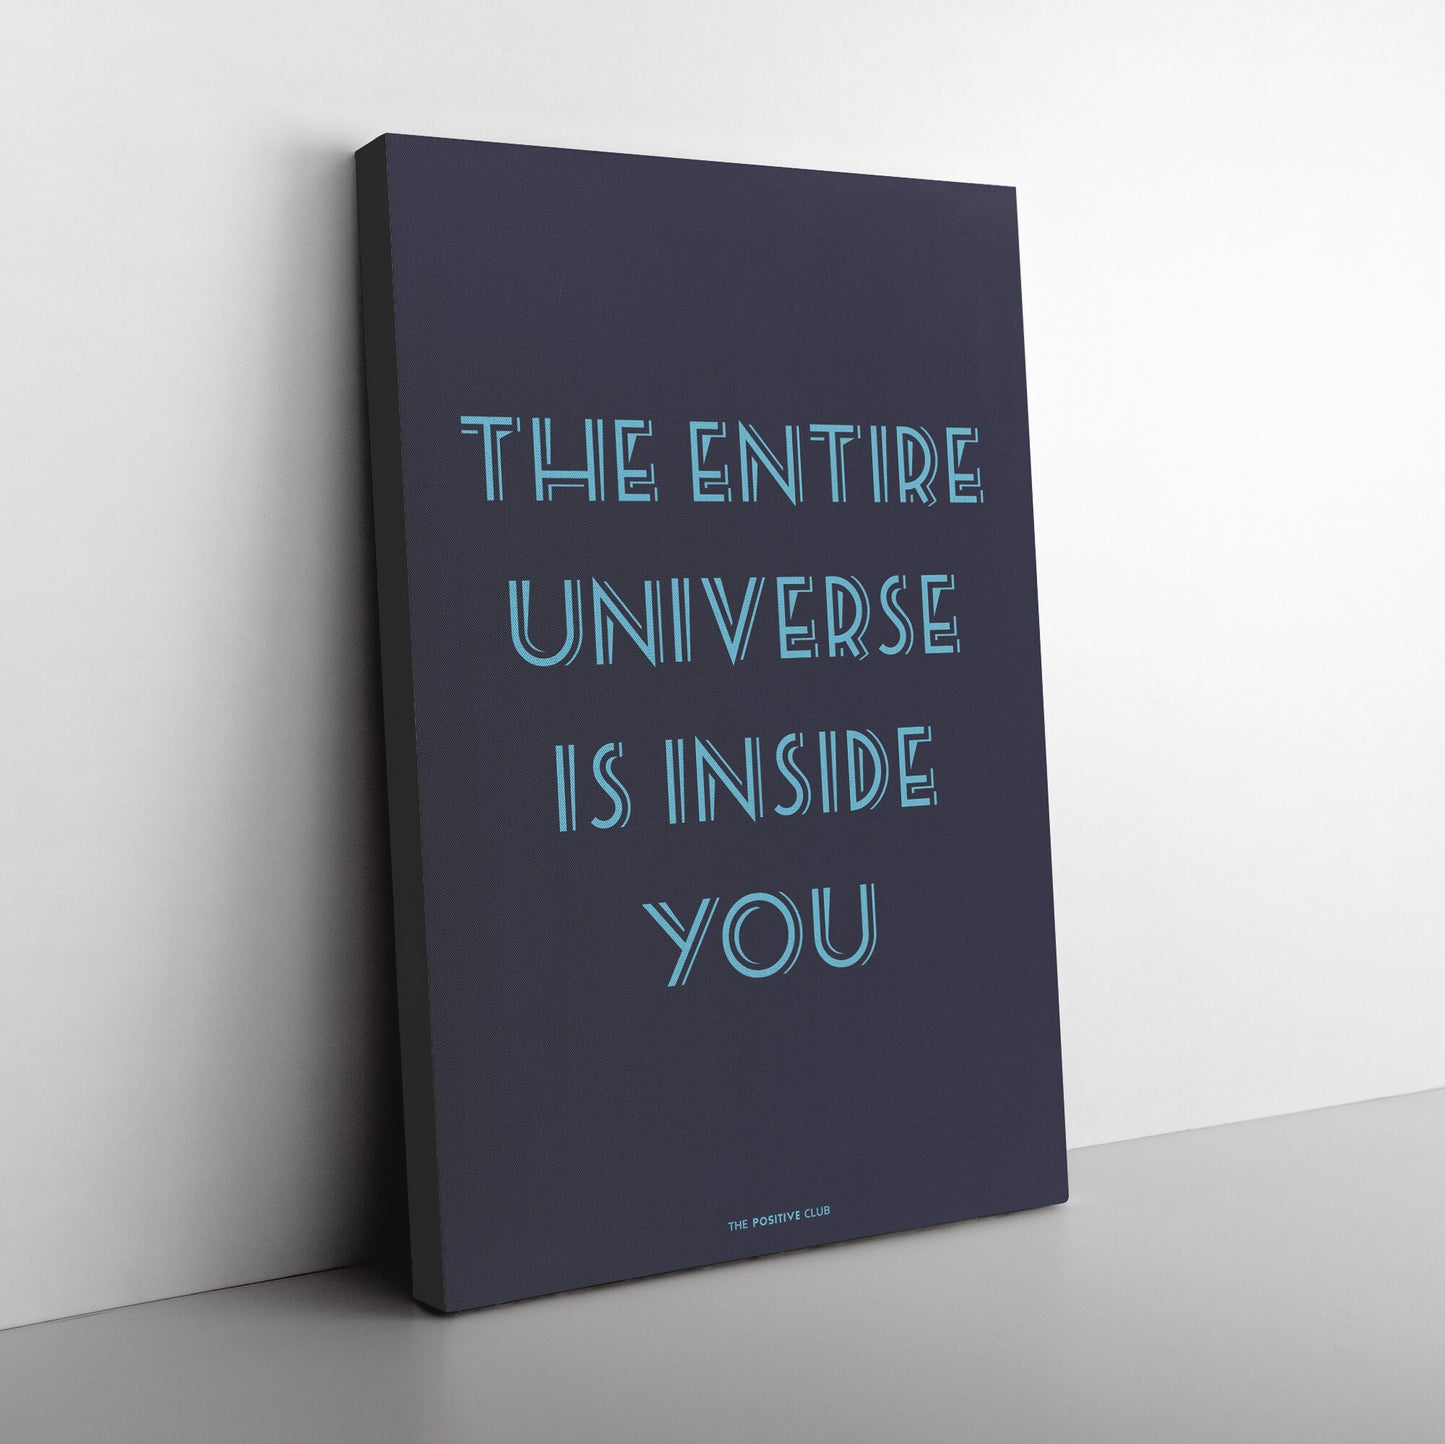 THE ENTIRE UNIVERSE IS INSIDE YOU